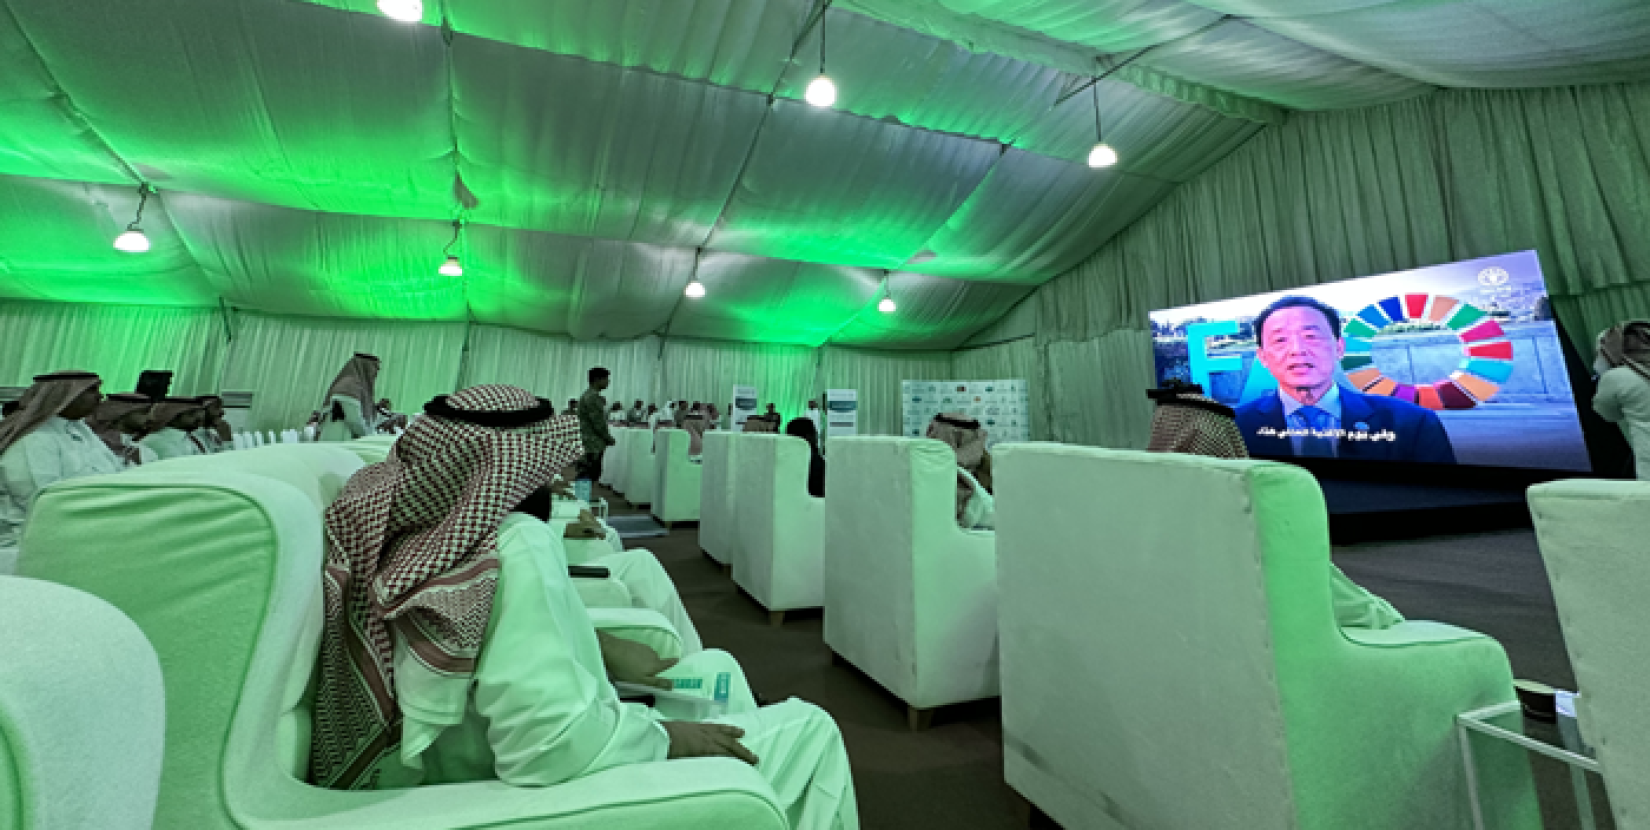 World Food Day 2023 Celebrations in Saudi Arabia Focus on Water Scarcity and Sustainable Agriculture